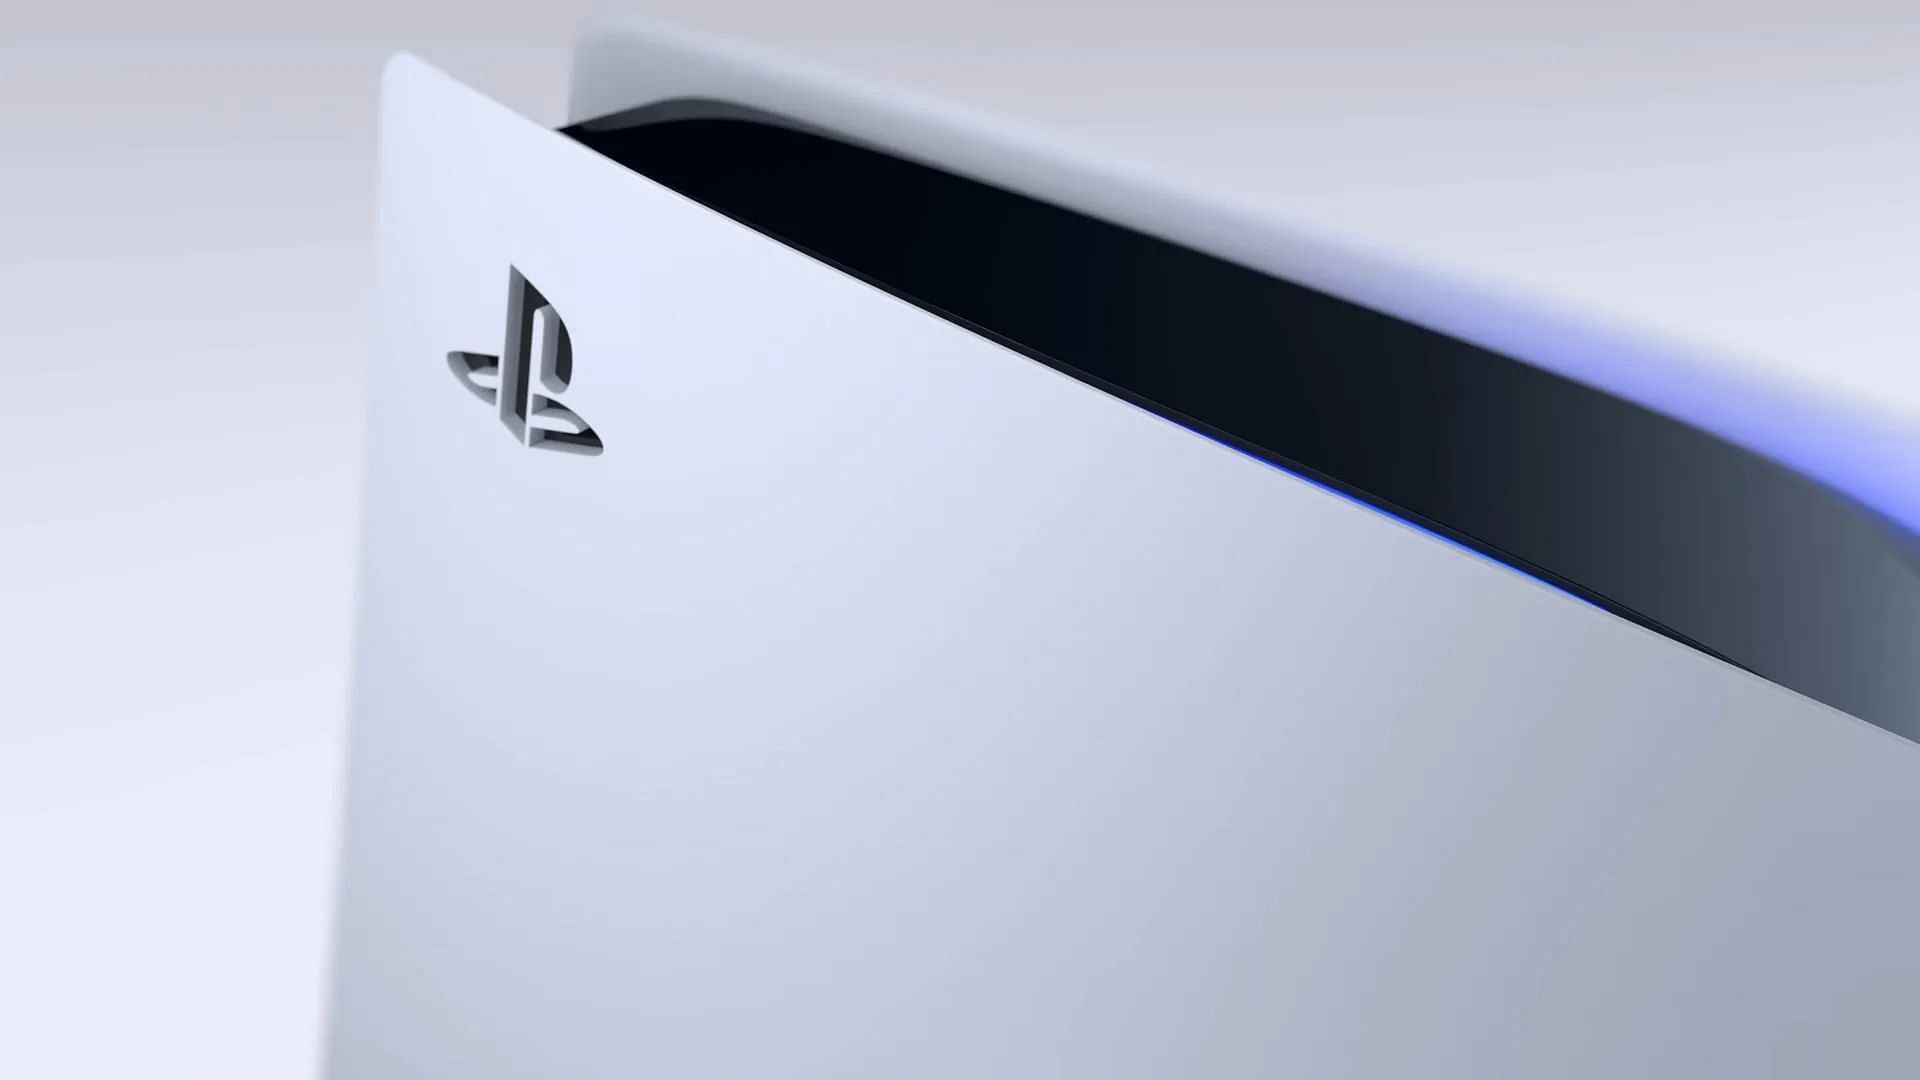 Why Microsoft Thinks Sony Will Release a PS5 Slim Later This Year